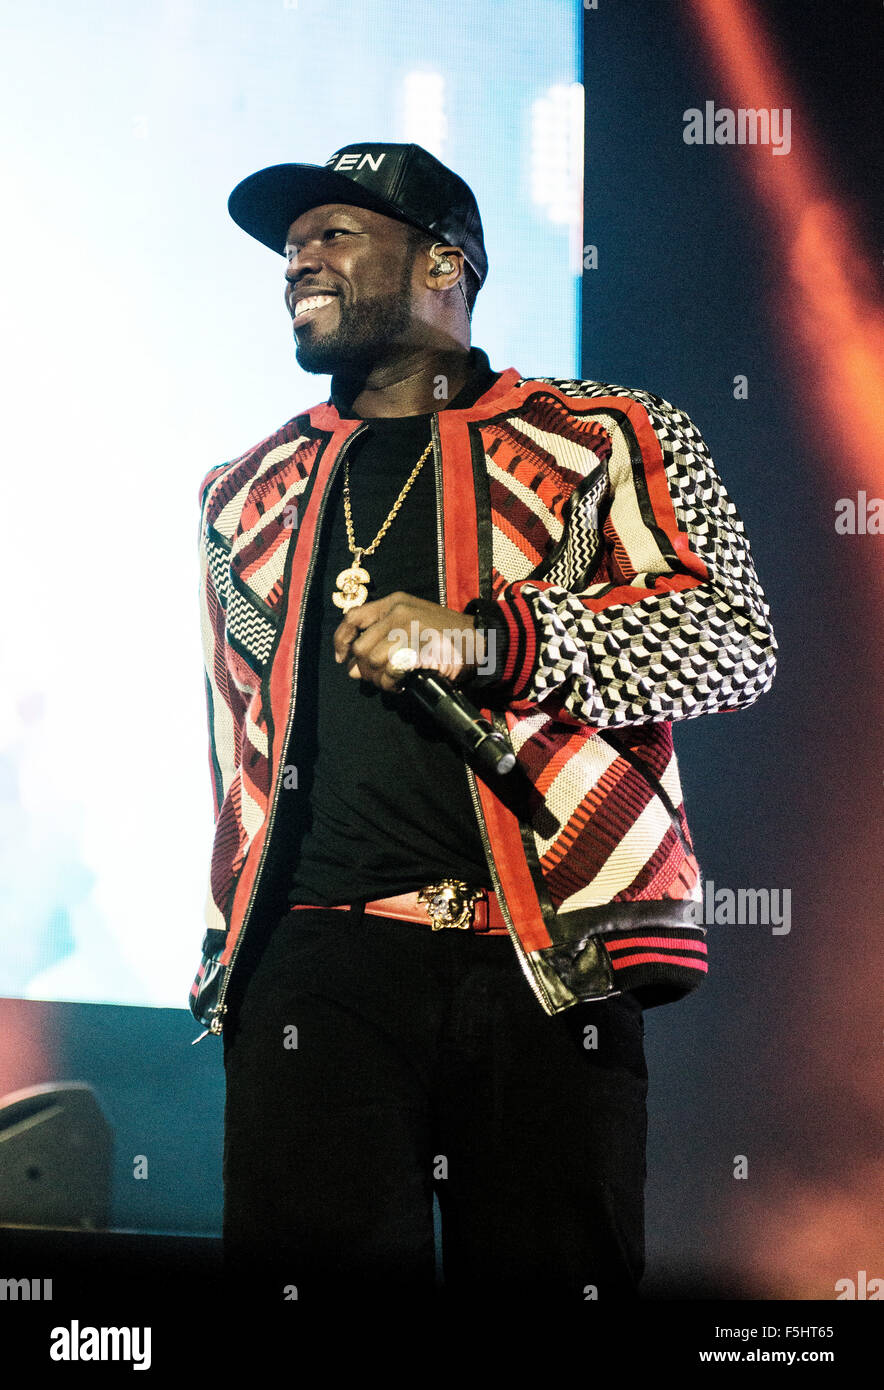 Glasgow, Scotland, UK. 4th November, 2015. Rapper CURTIS Jackson aka 50 Cent , performs at The SSE Hydro on November 4, 2015 in Glasgow, Scotland. Credit:  Sam Kovak/Alamy Live News Stock Photo